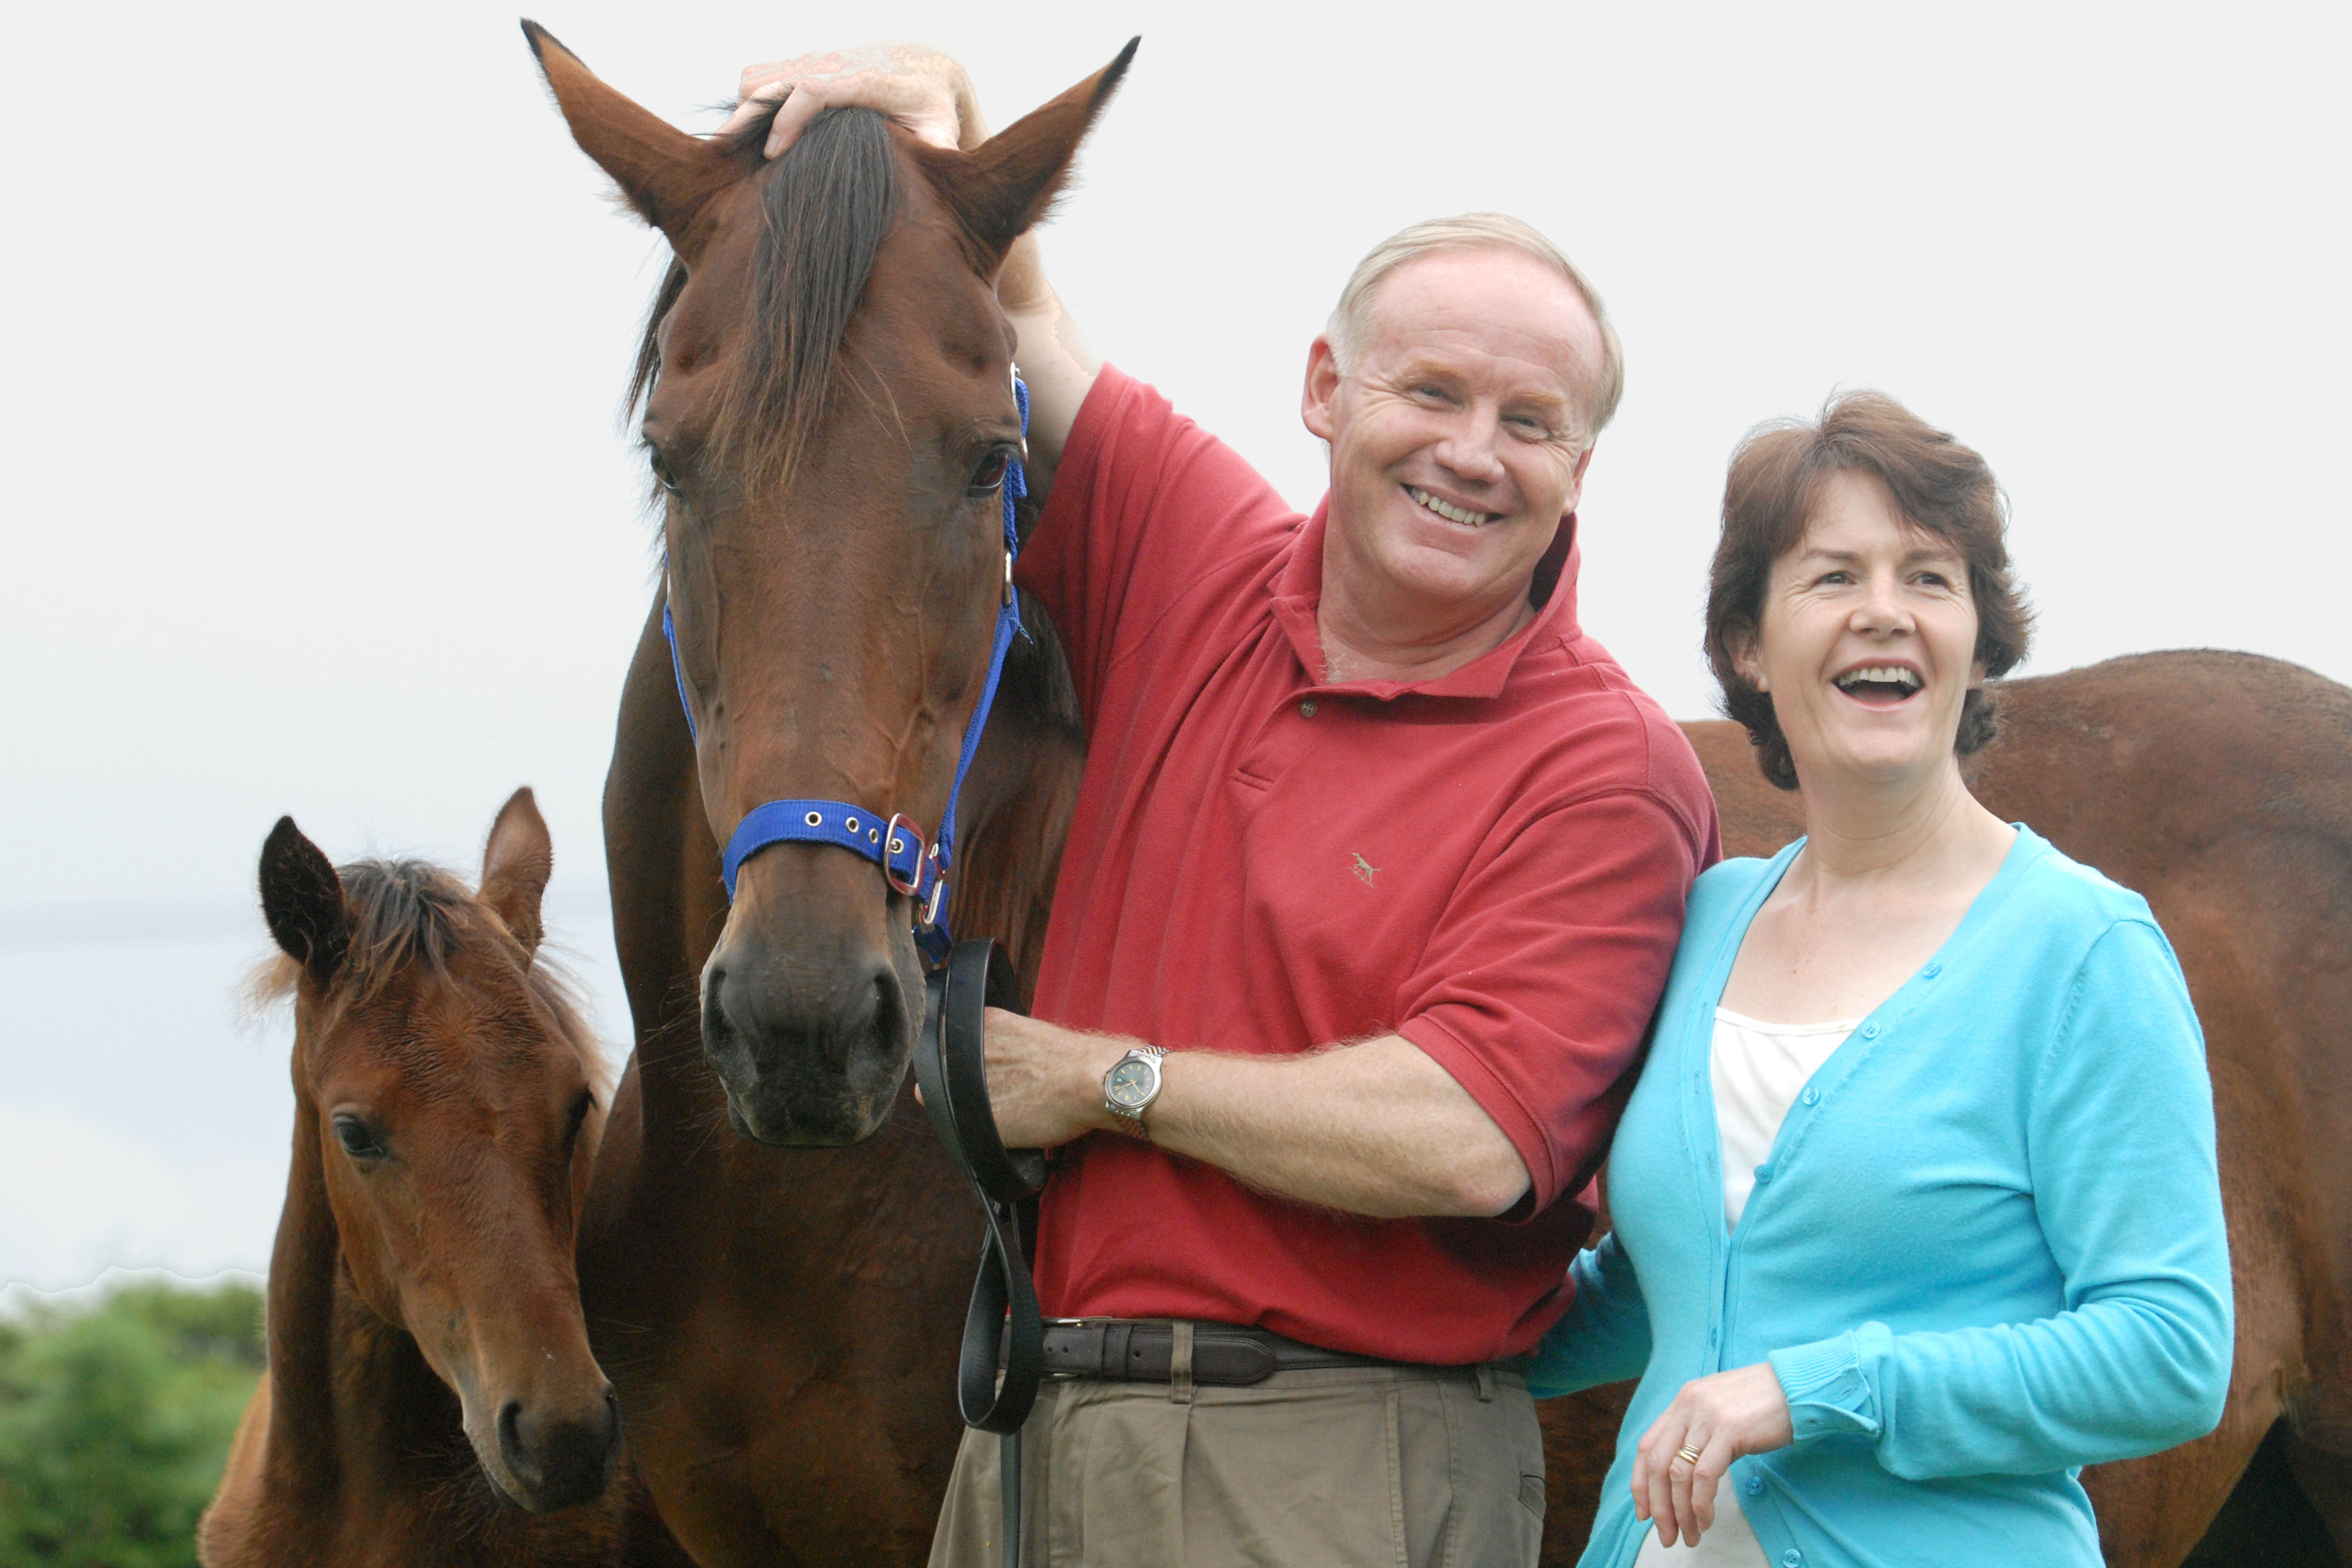 Breeders Susan Archer and husband Michael Martin visiting Sunline and her last foal, a filly by Hussonet, at stud in New Zealand. Sunline died in 2009 after suffering from laminitis. Photo: Bronwen Healy